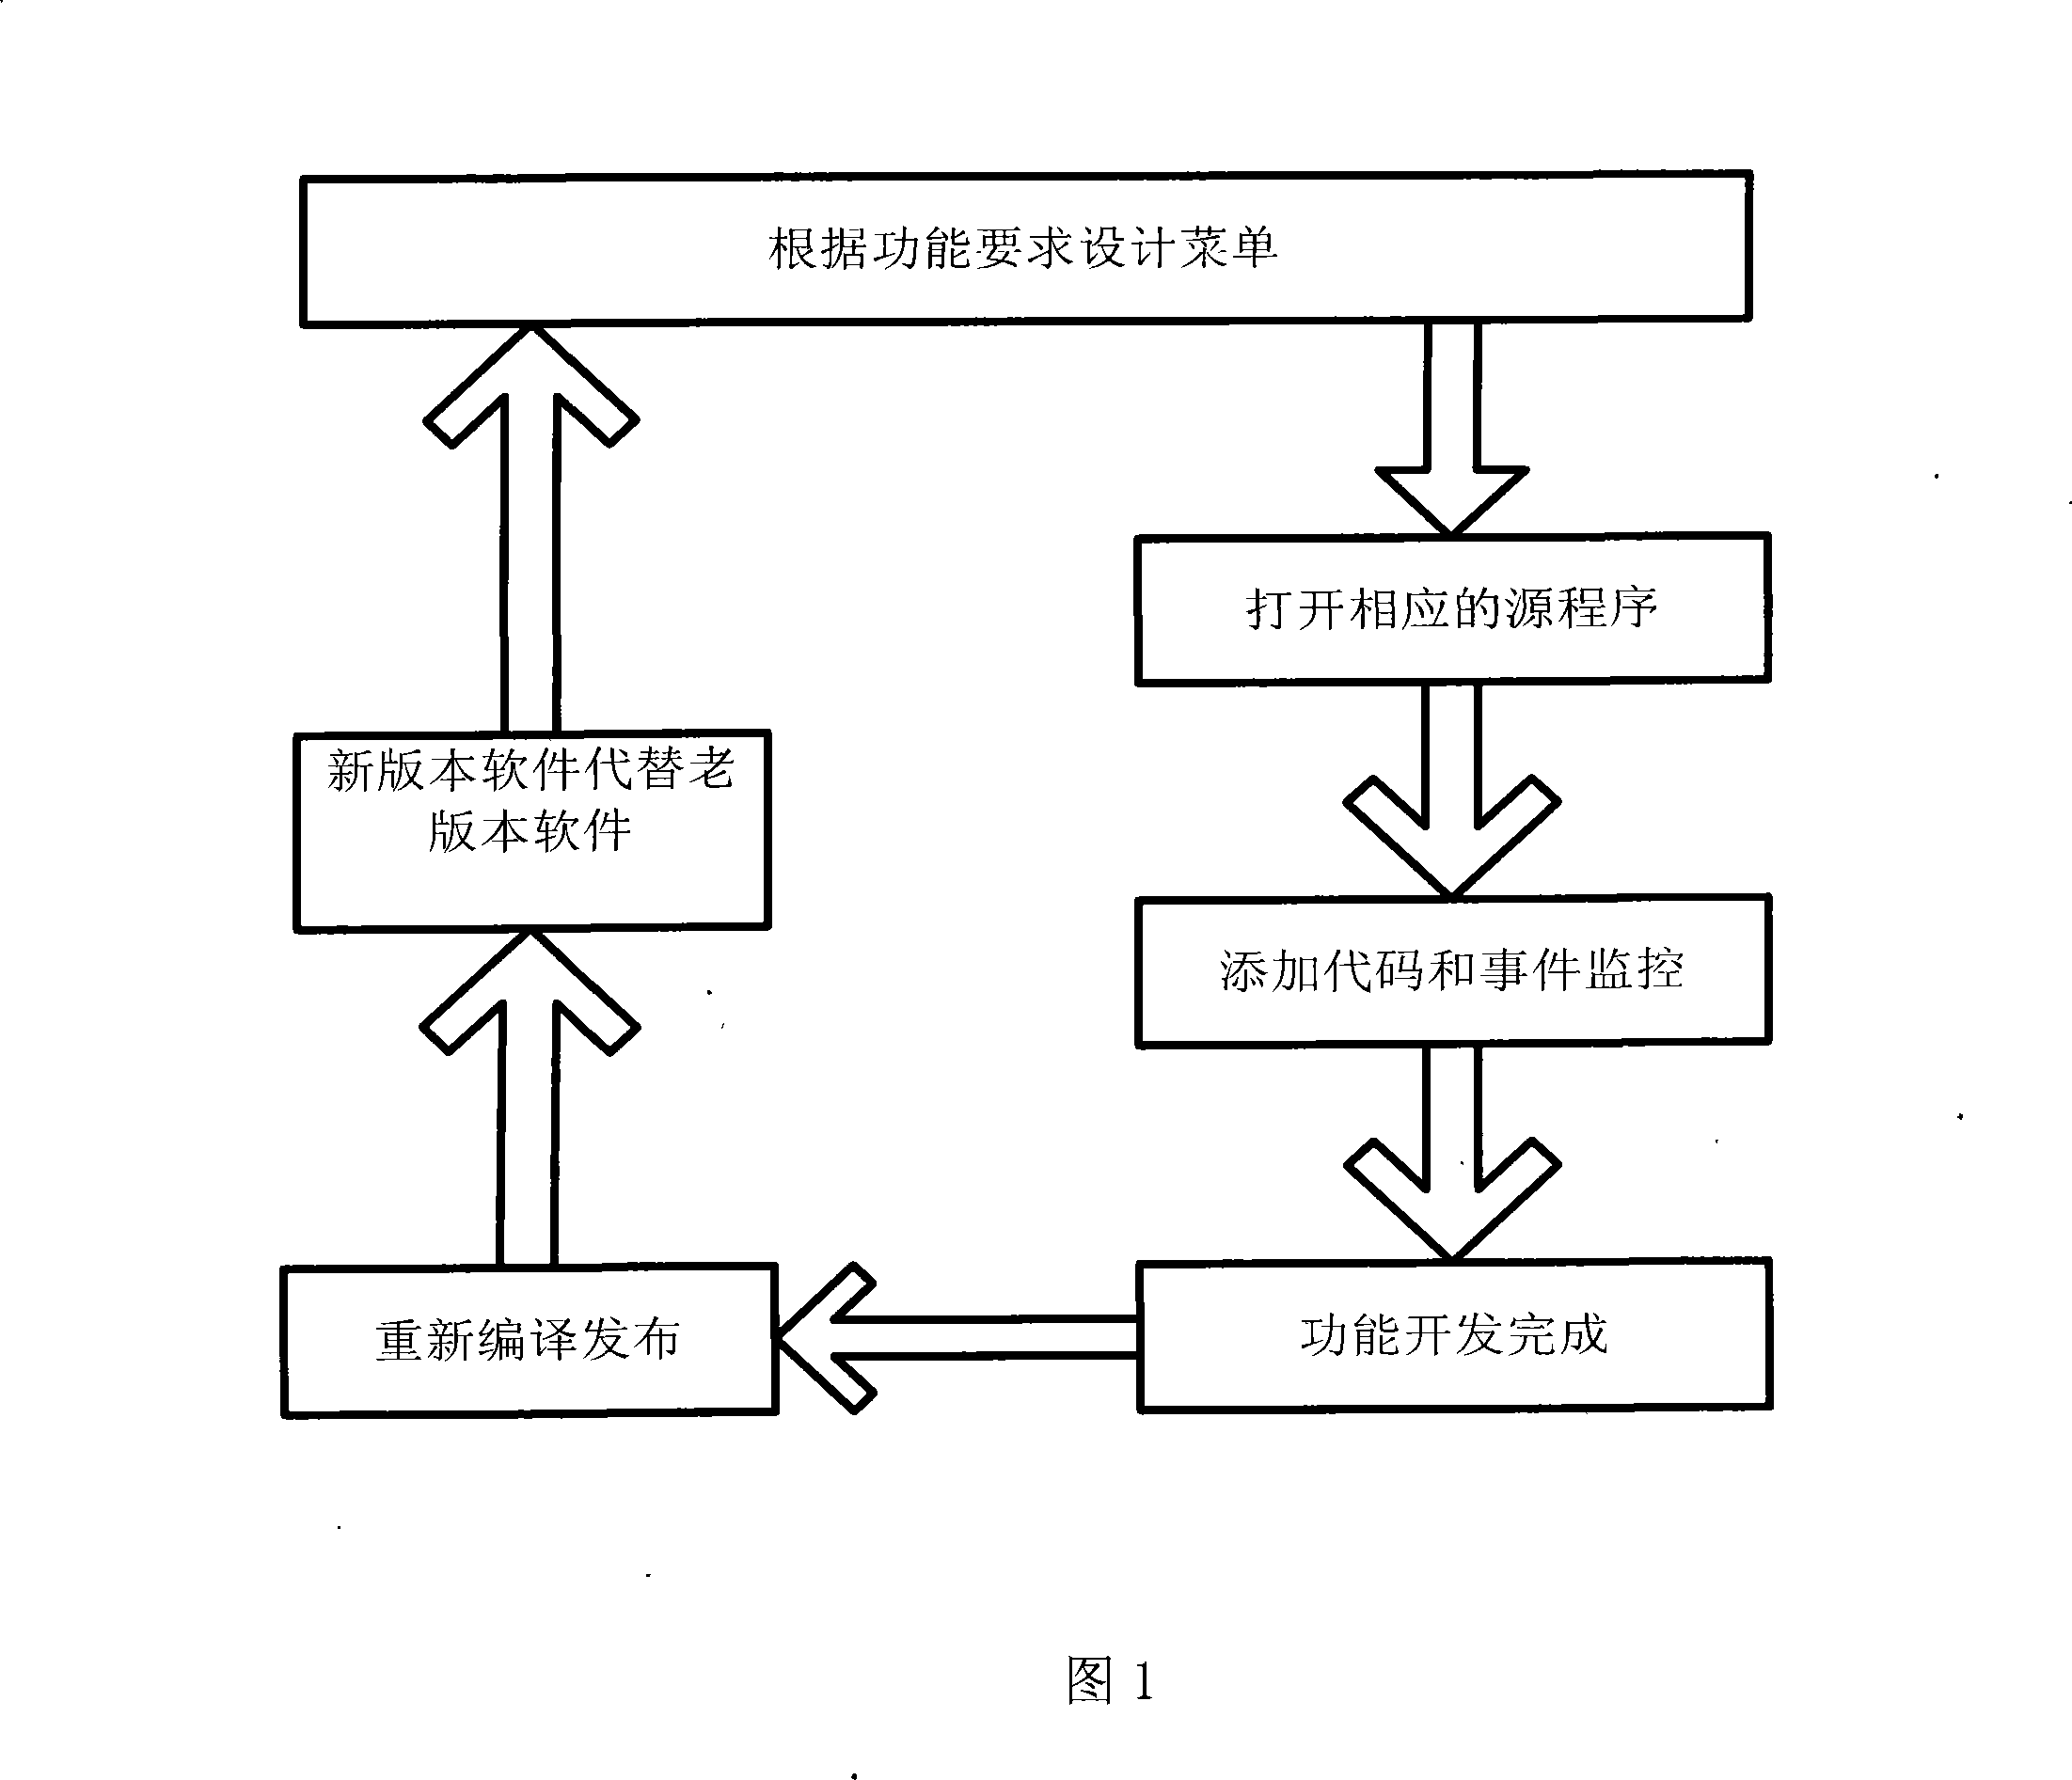 Menu automatic generation system and method for based on file